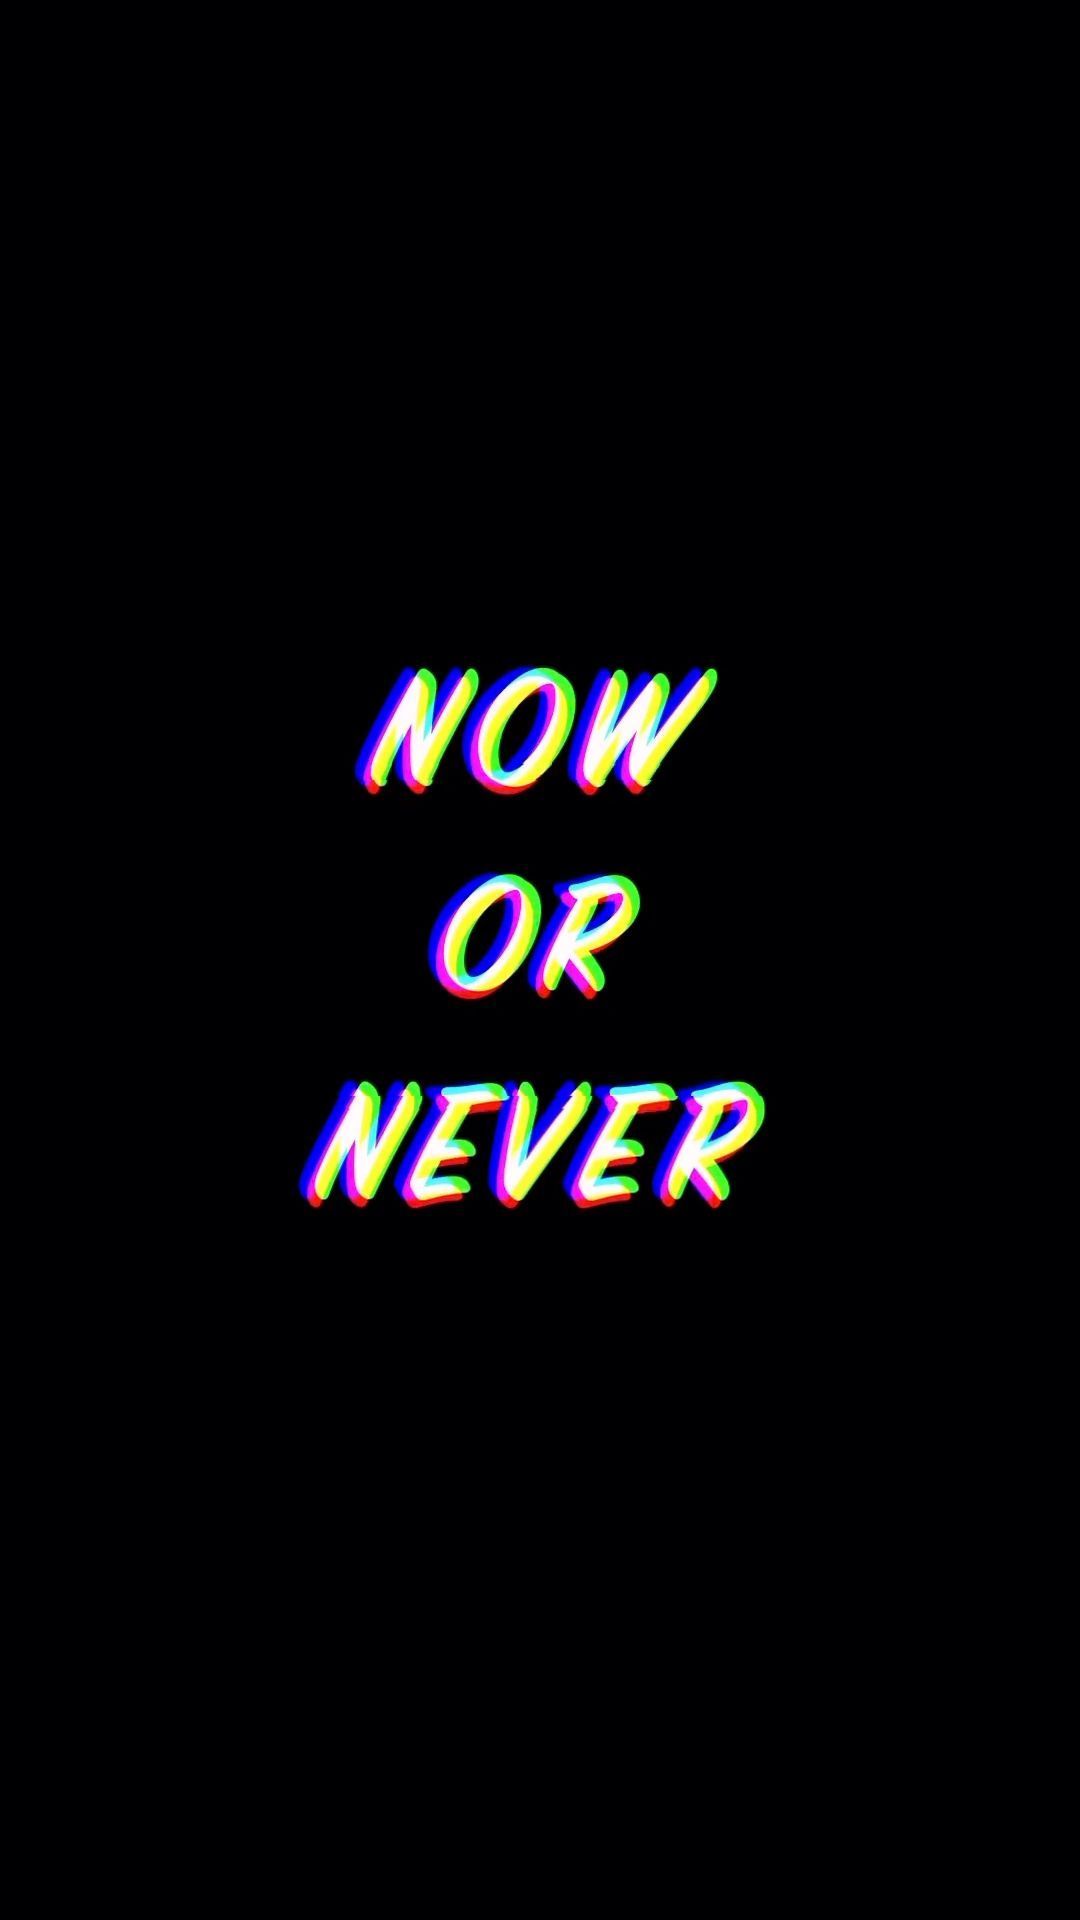 Now or never wallpapers